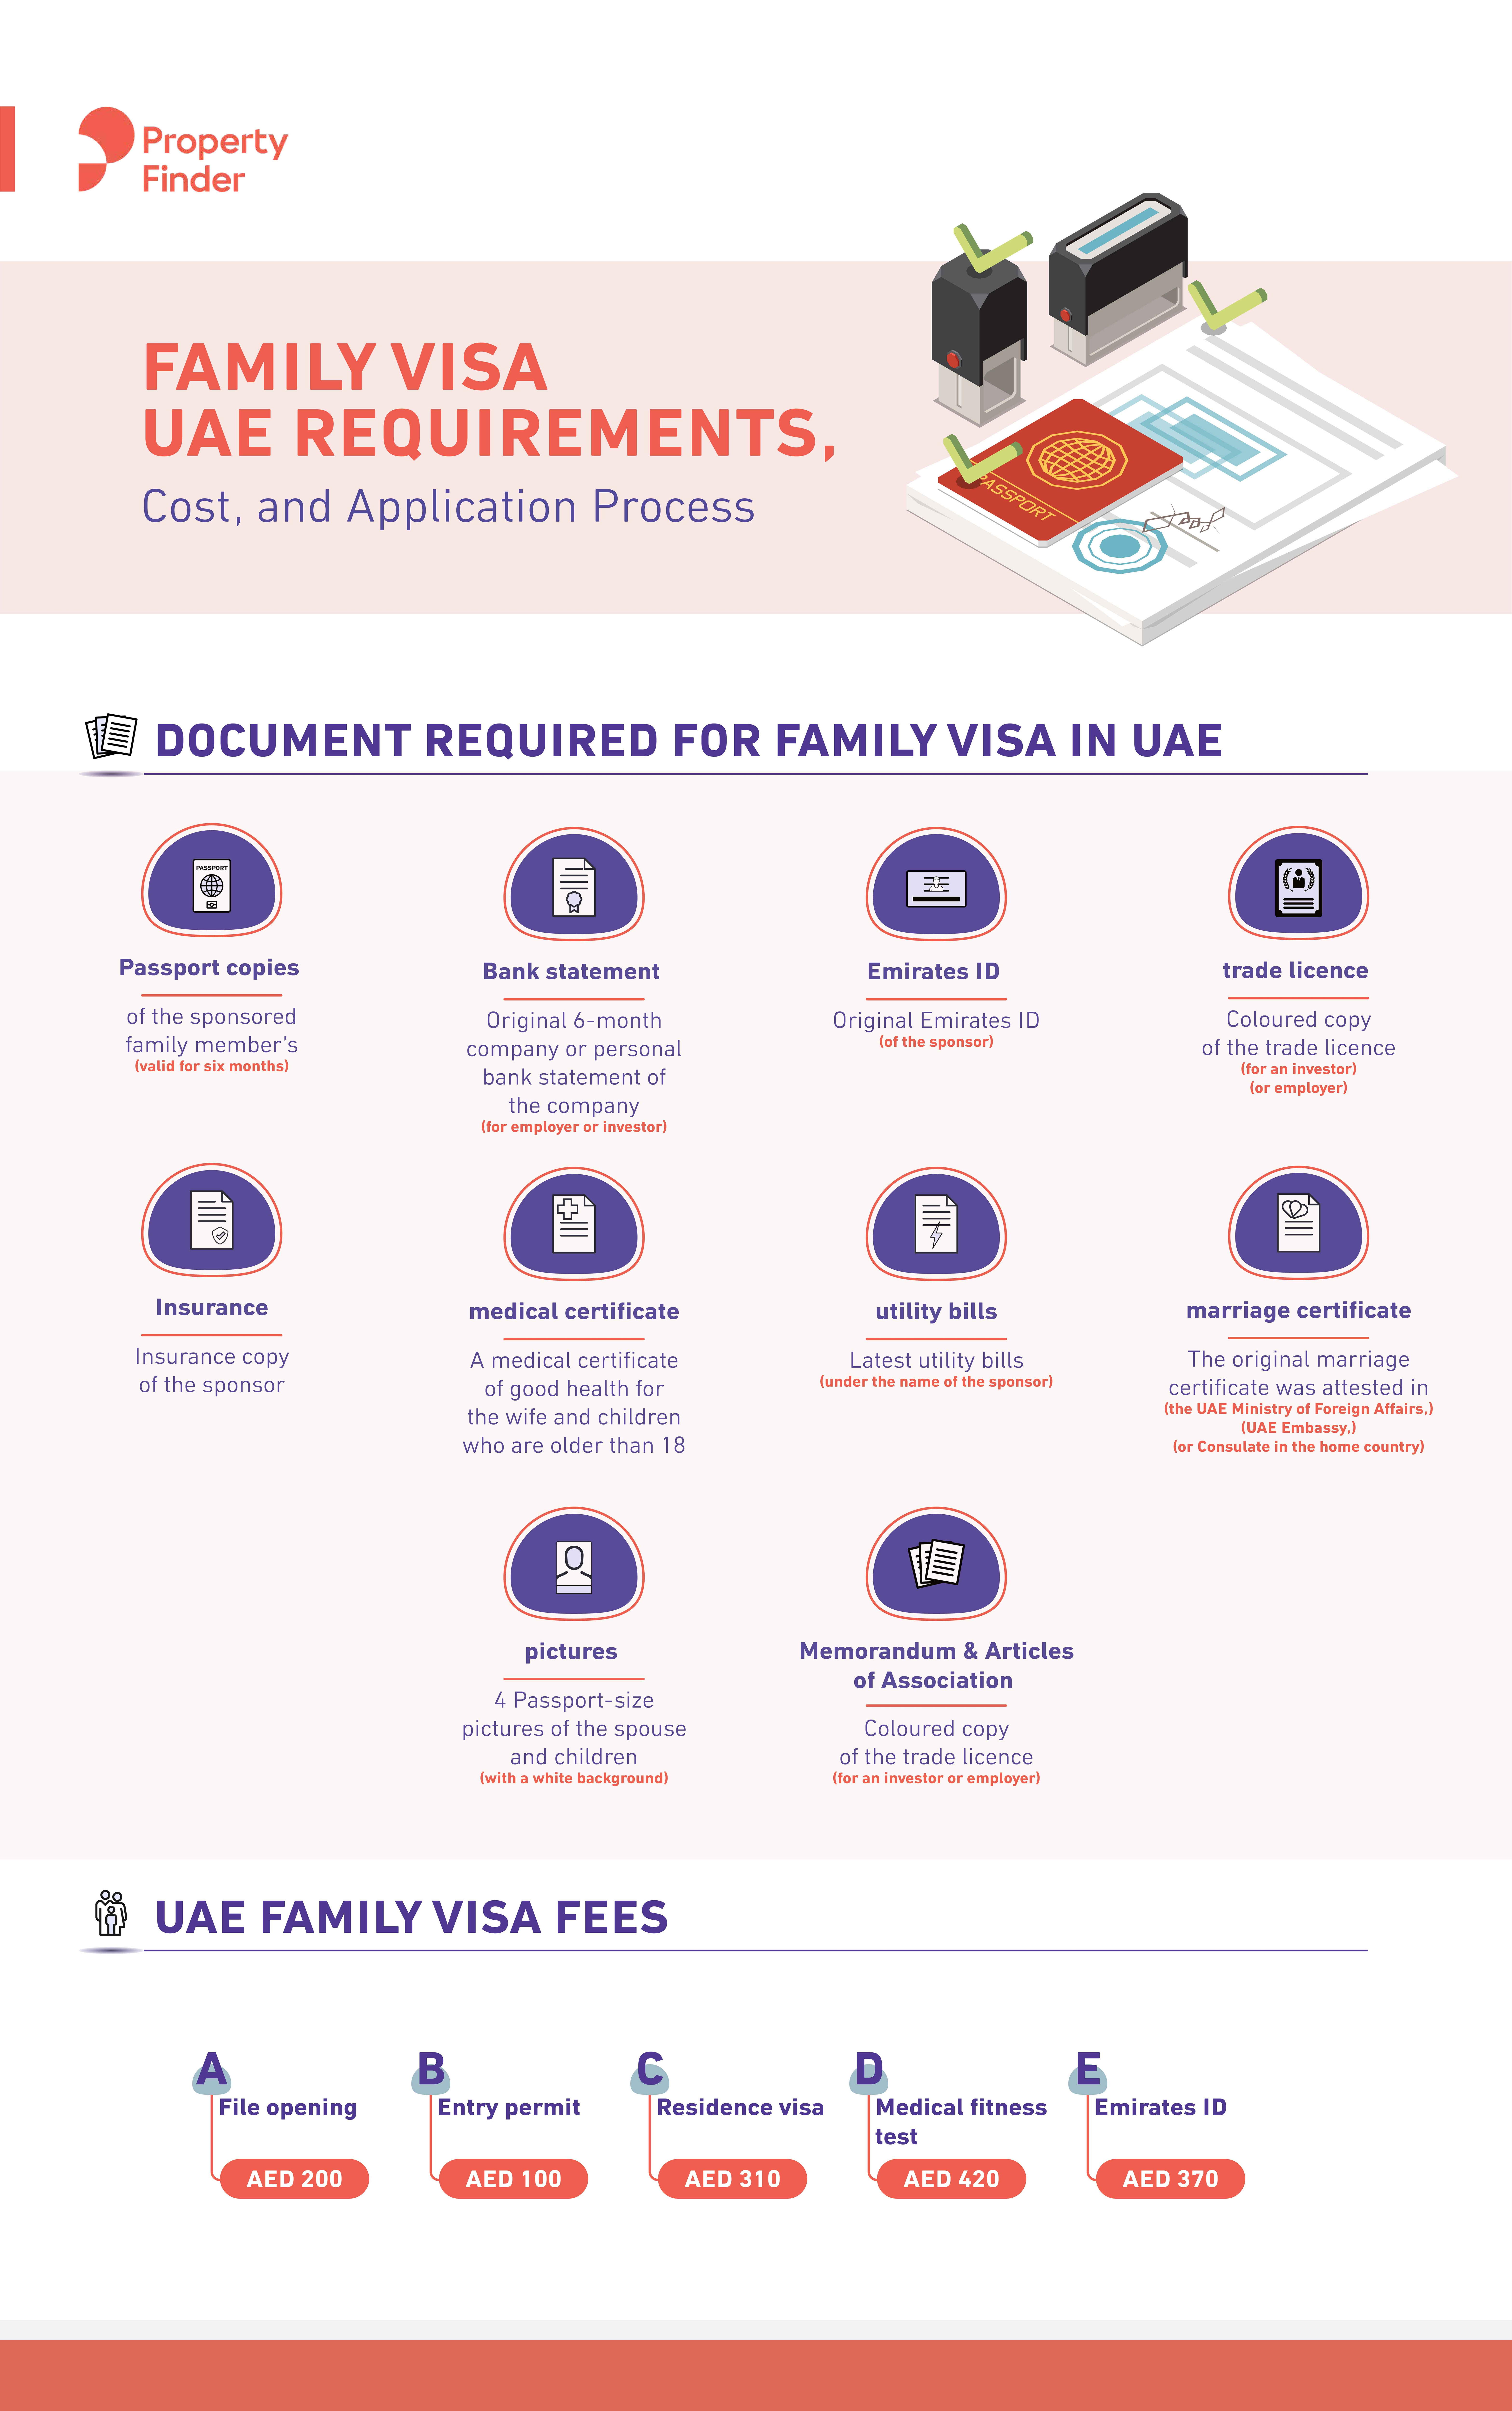 Document Required for Family Visa in UAE